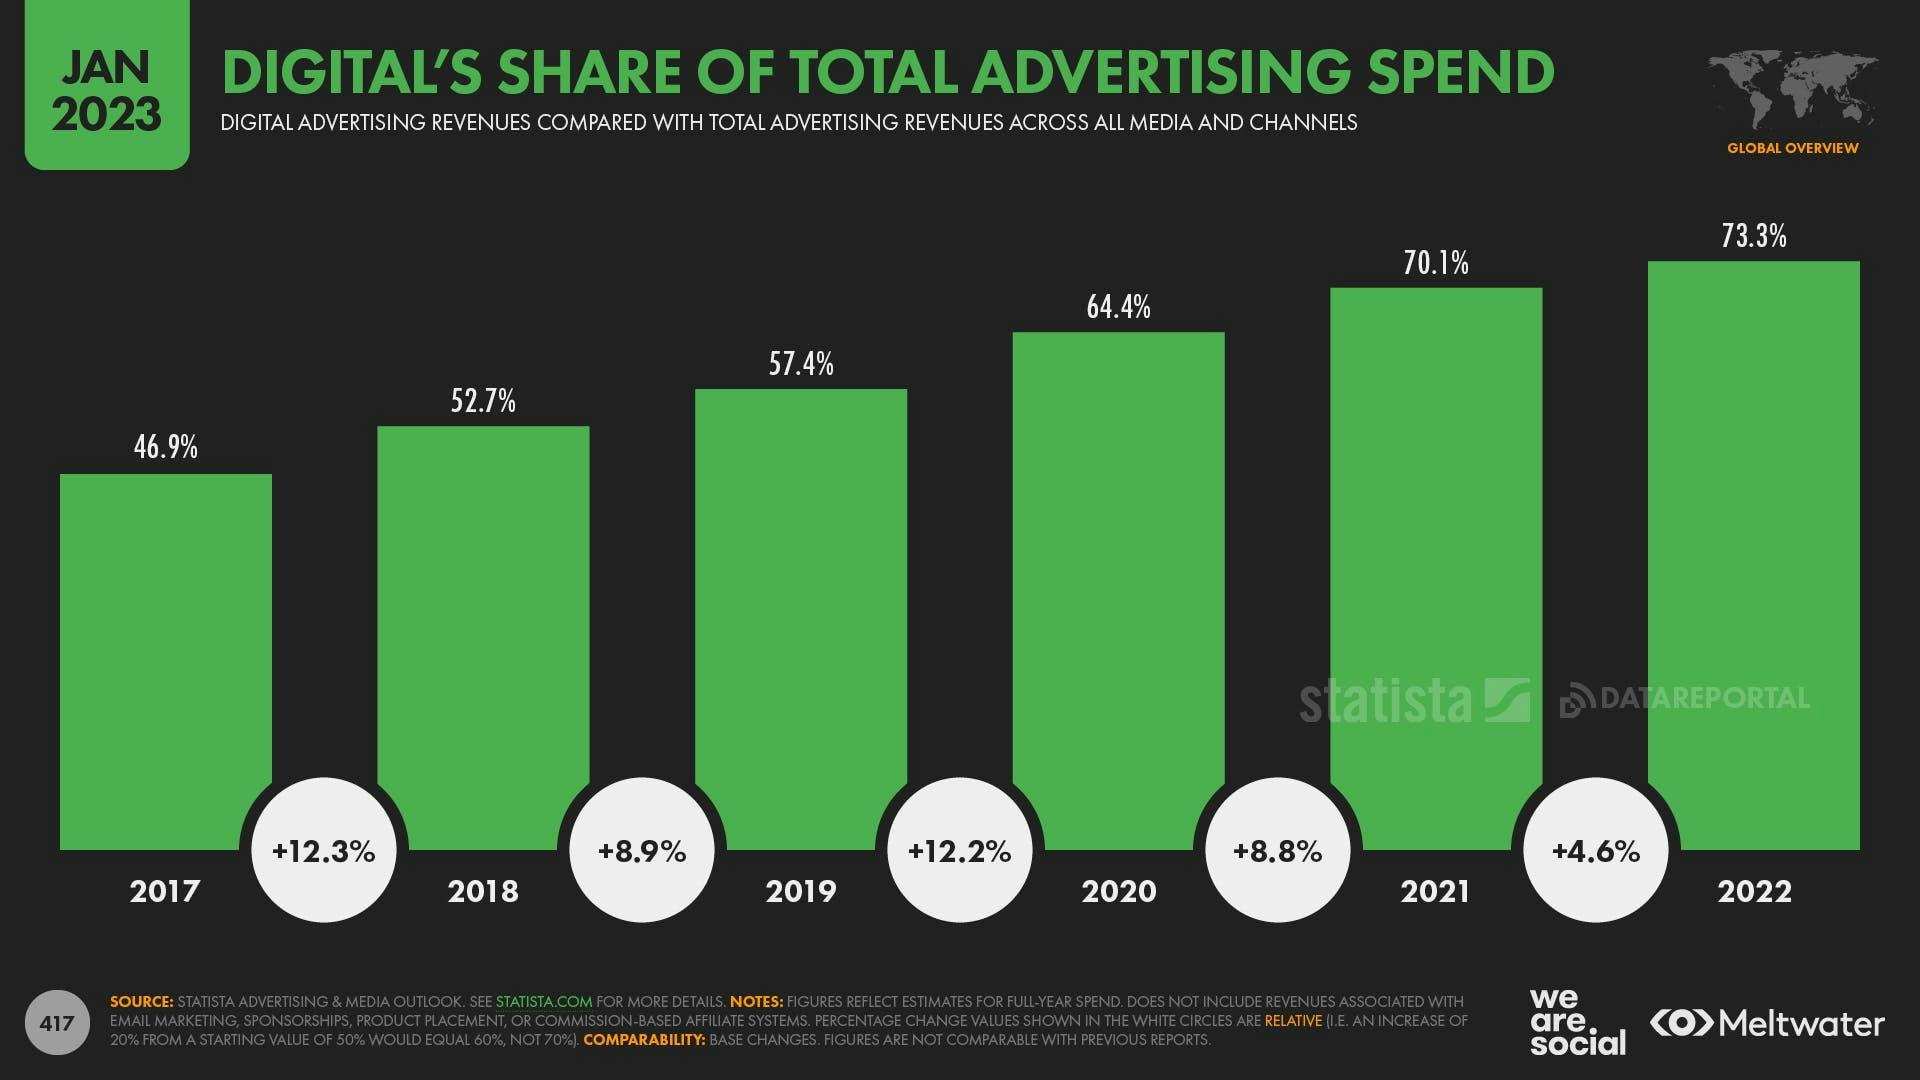 digital's share of total advertising spend 2017 - 2022